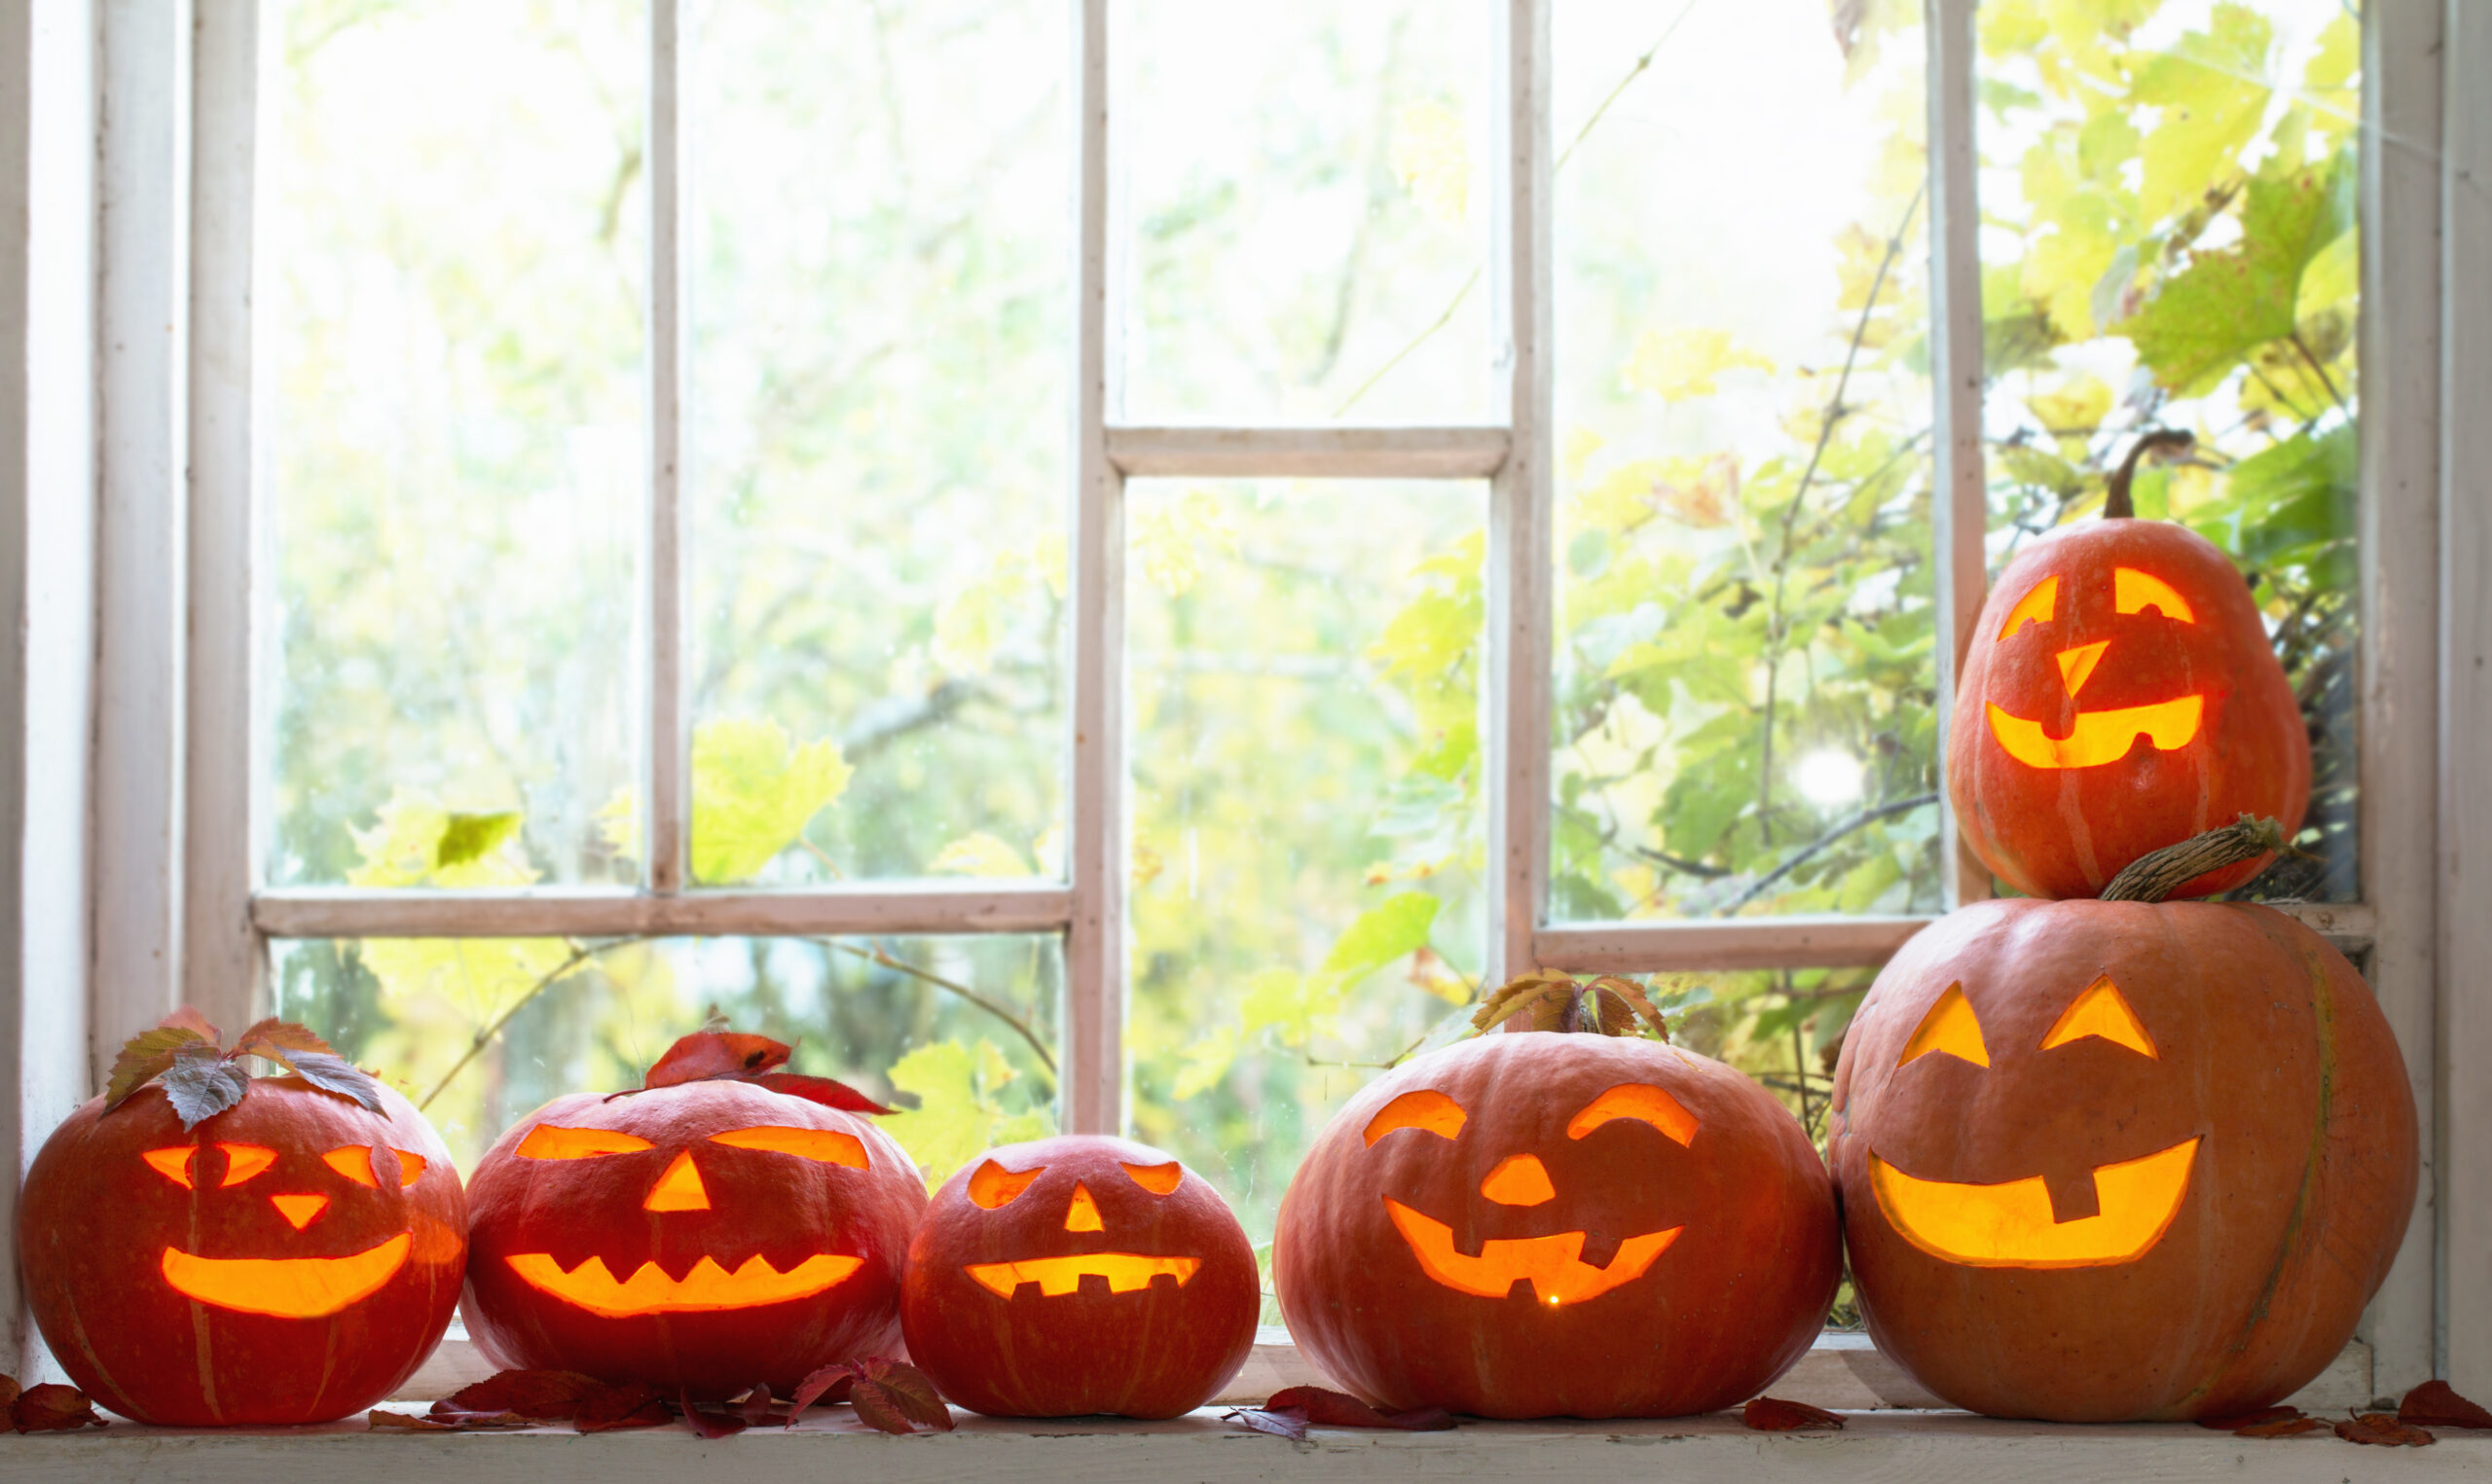 Don’t let the ghouls in through leaking windows this Halloween.